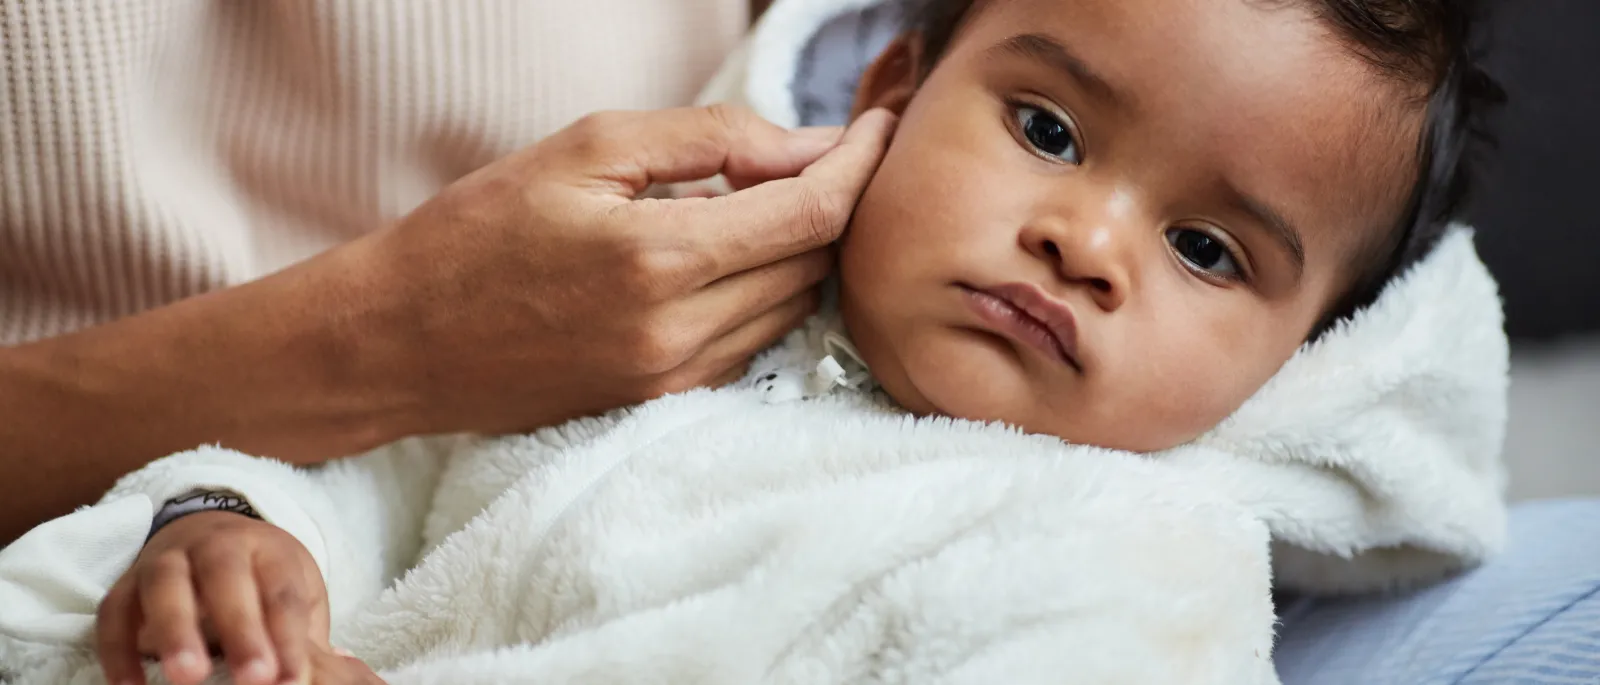 Recurrent Ear Infections in Children: When Is It Time to Get Tubes?